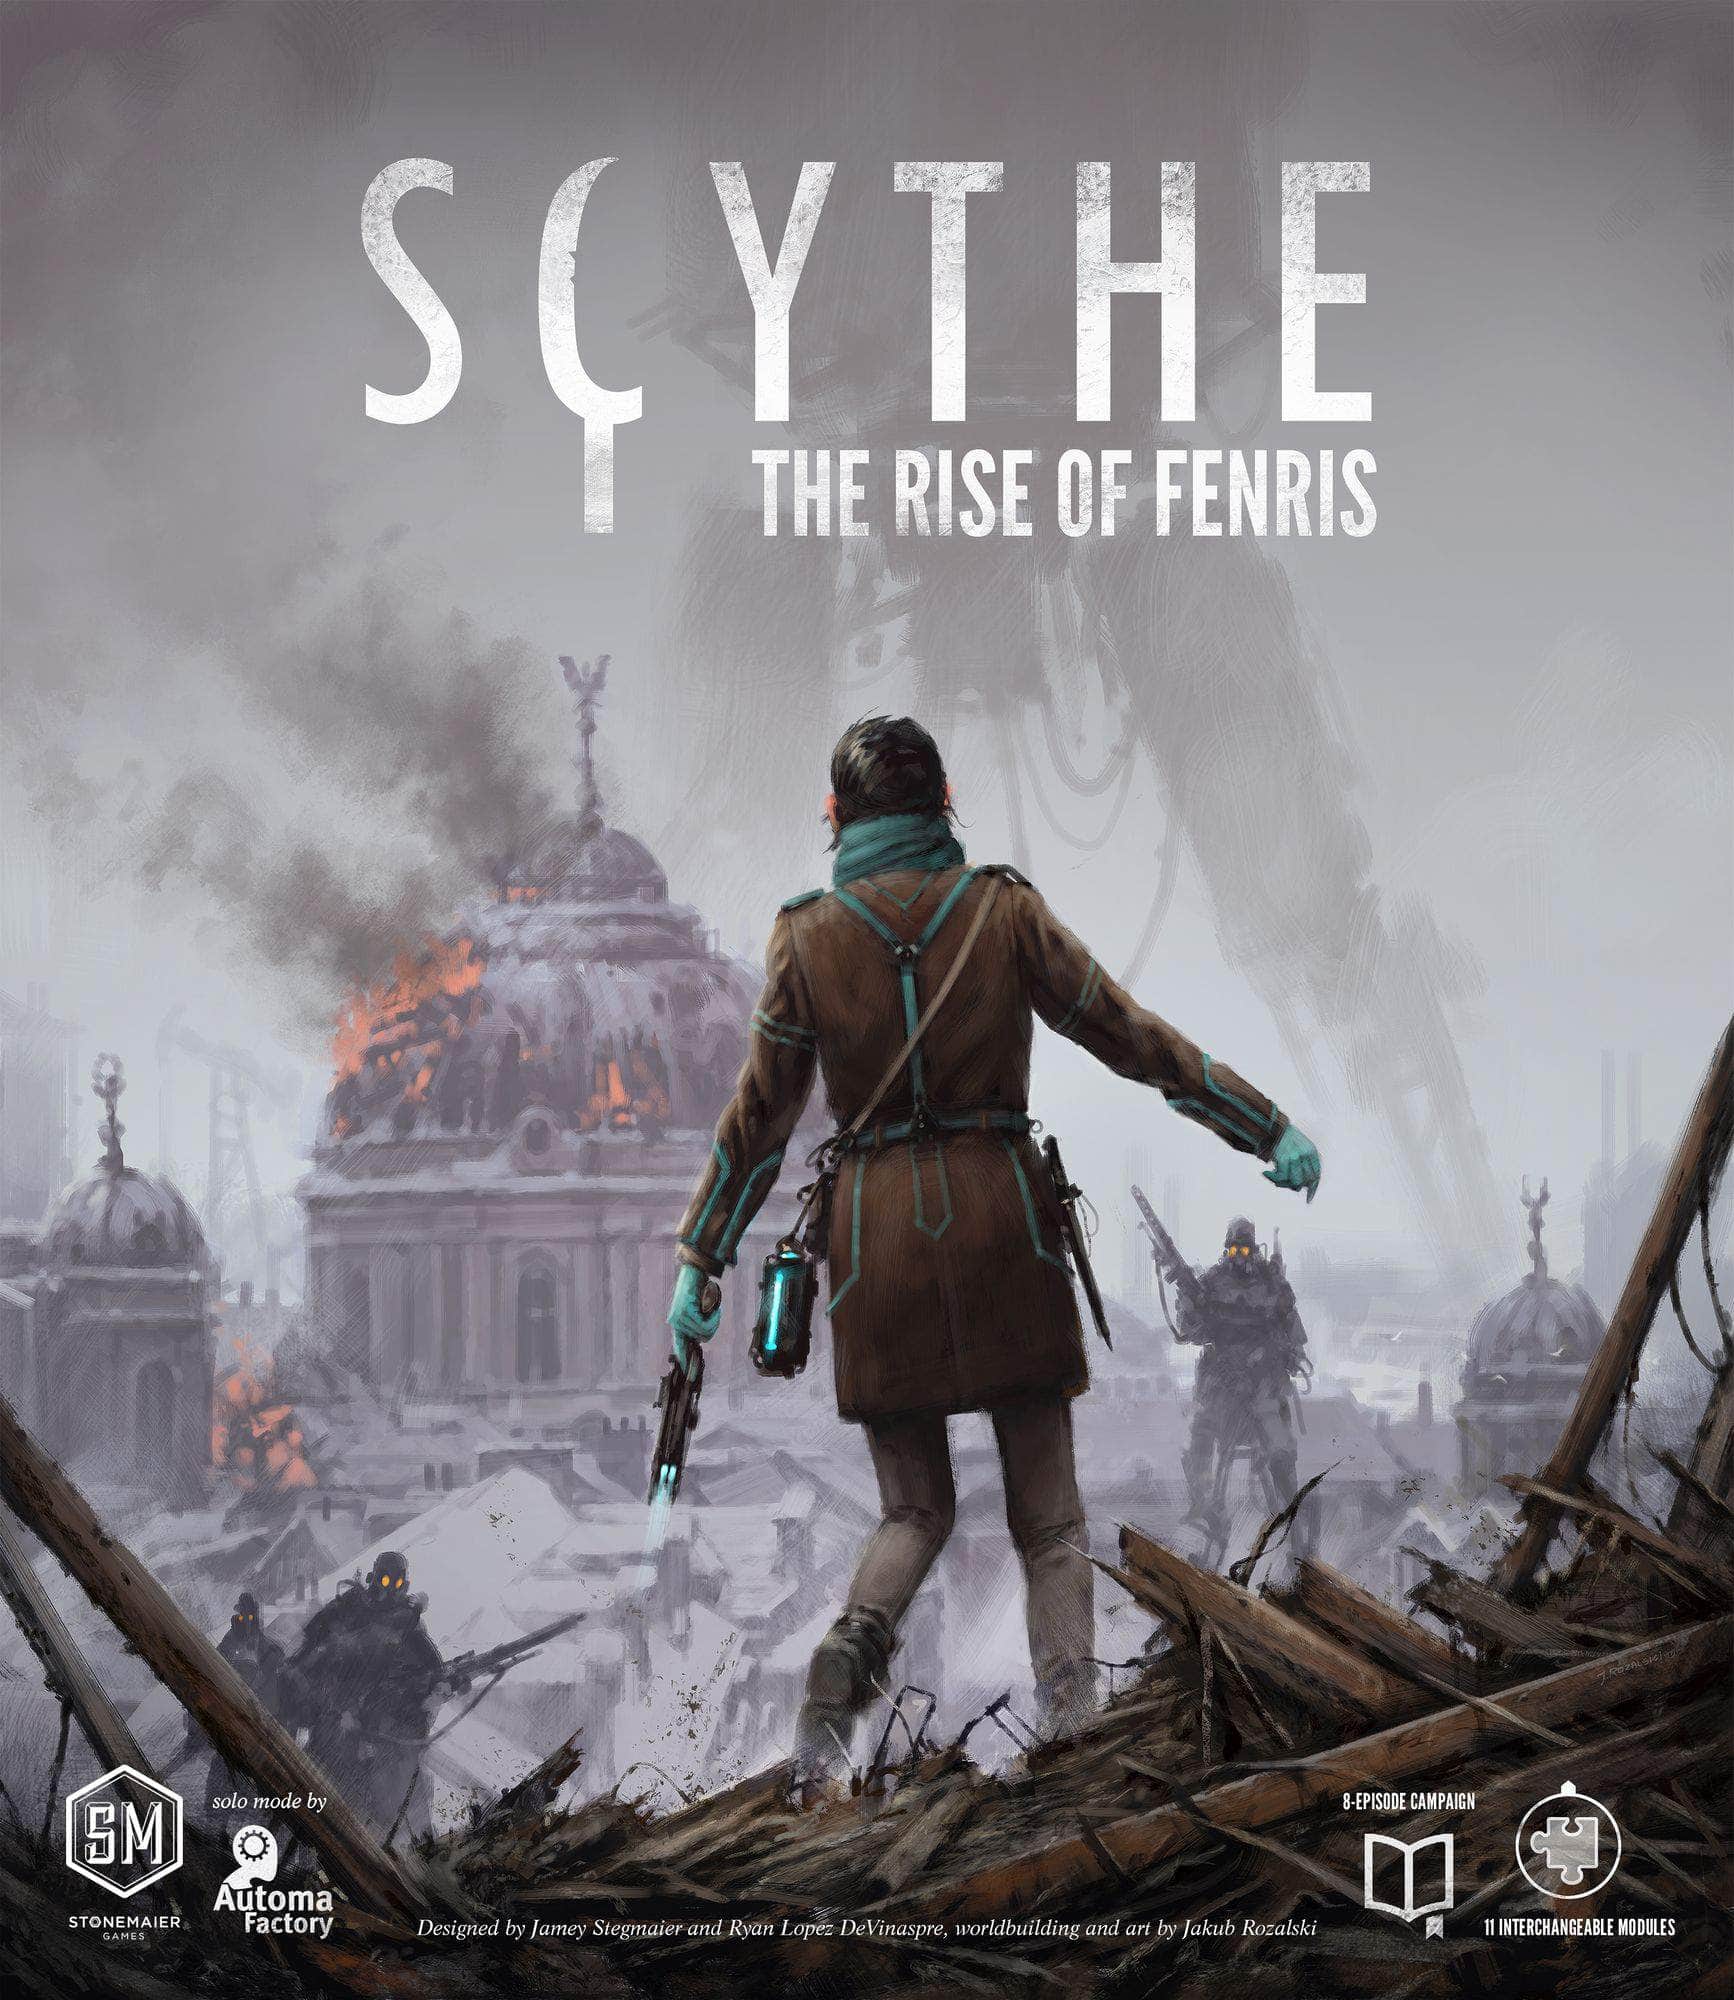 Scythe: The Rise of Fenris Retail Board Game Expansion Stonemaier Games, Crowd Games, Delta Vision Publishing, Feuerland Spiele, Shenos Games, Maldito Games, Matagot, Phalanx KS800563A